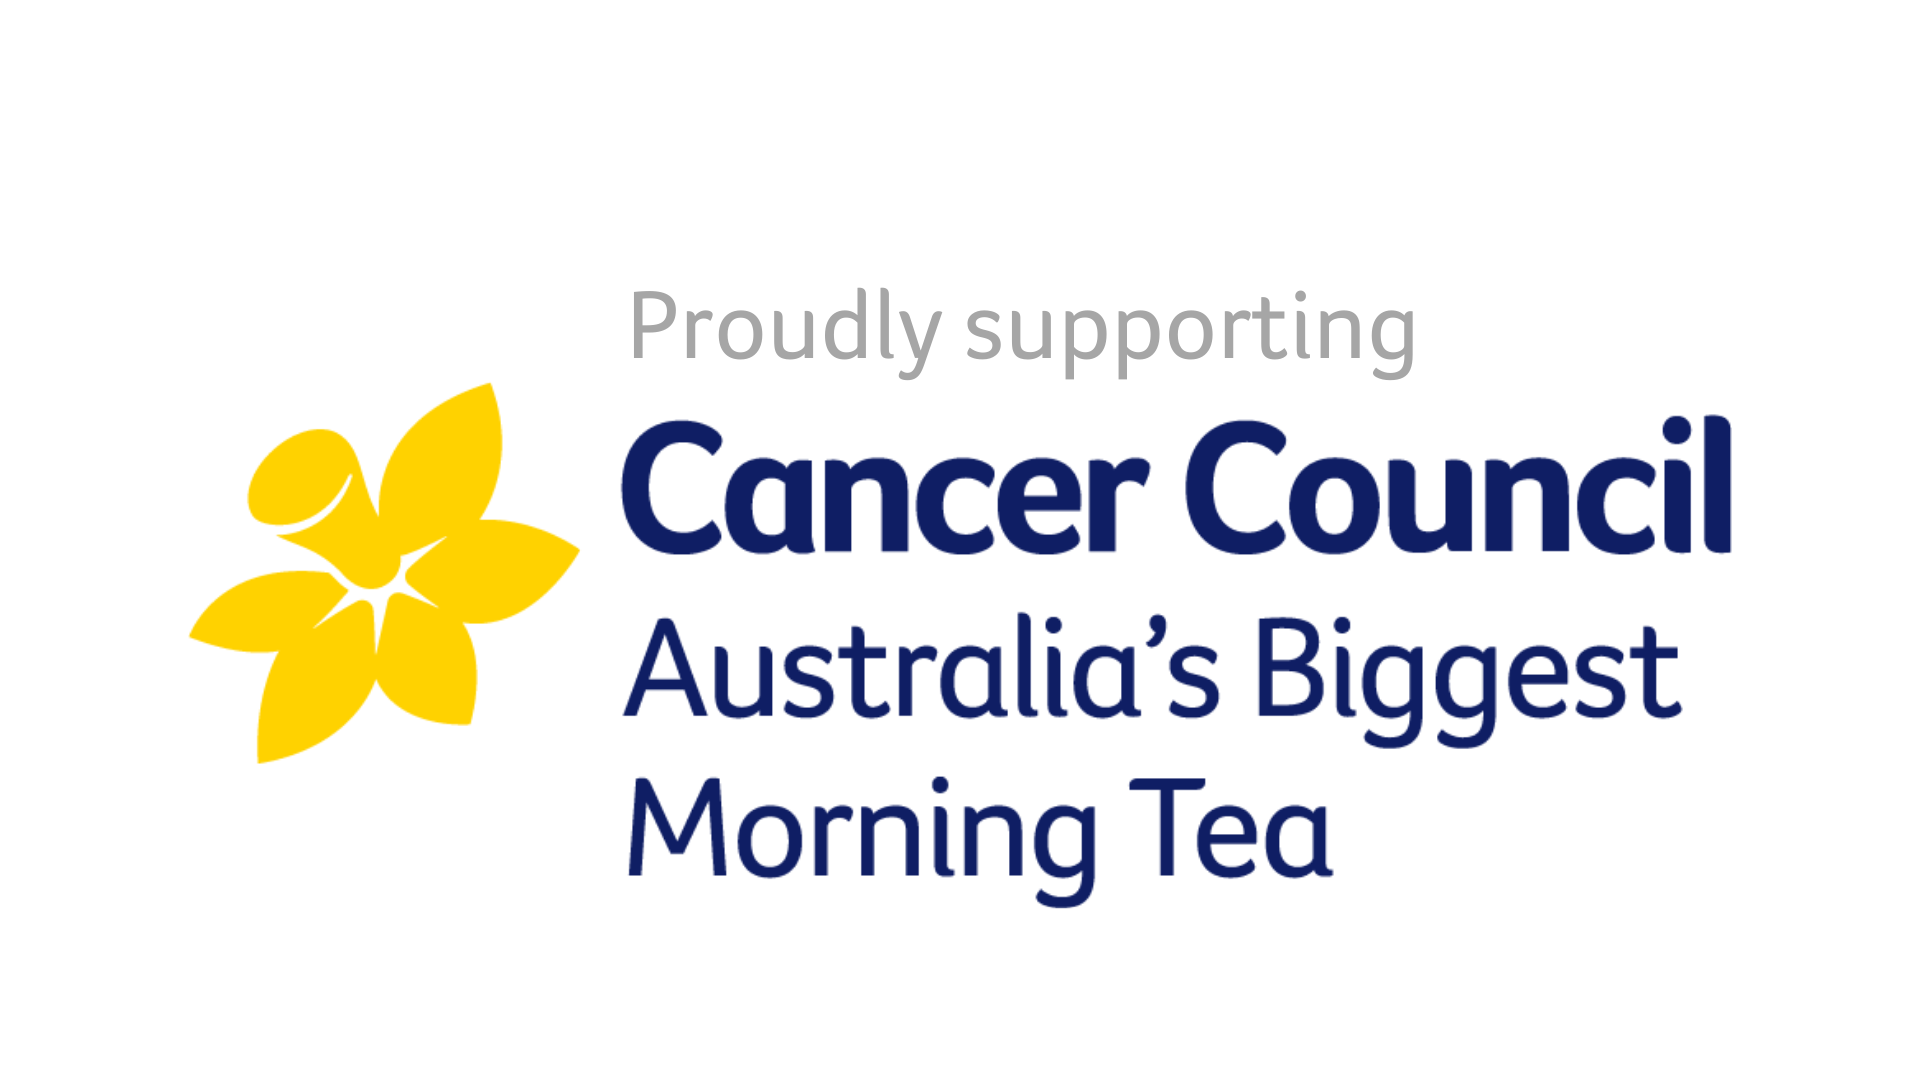 Supporter of the Cancer Council Australia's Biggest Morning Tea